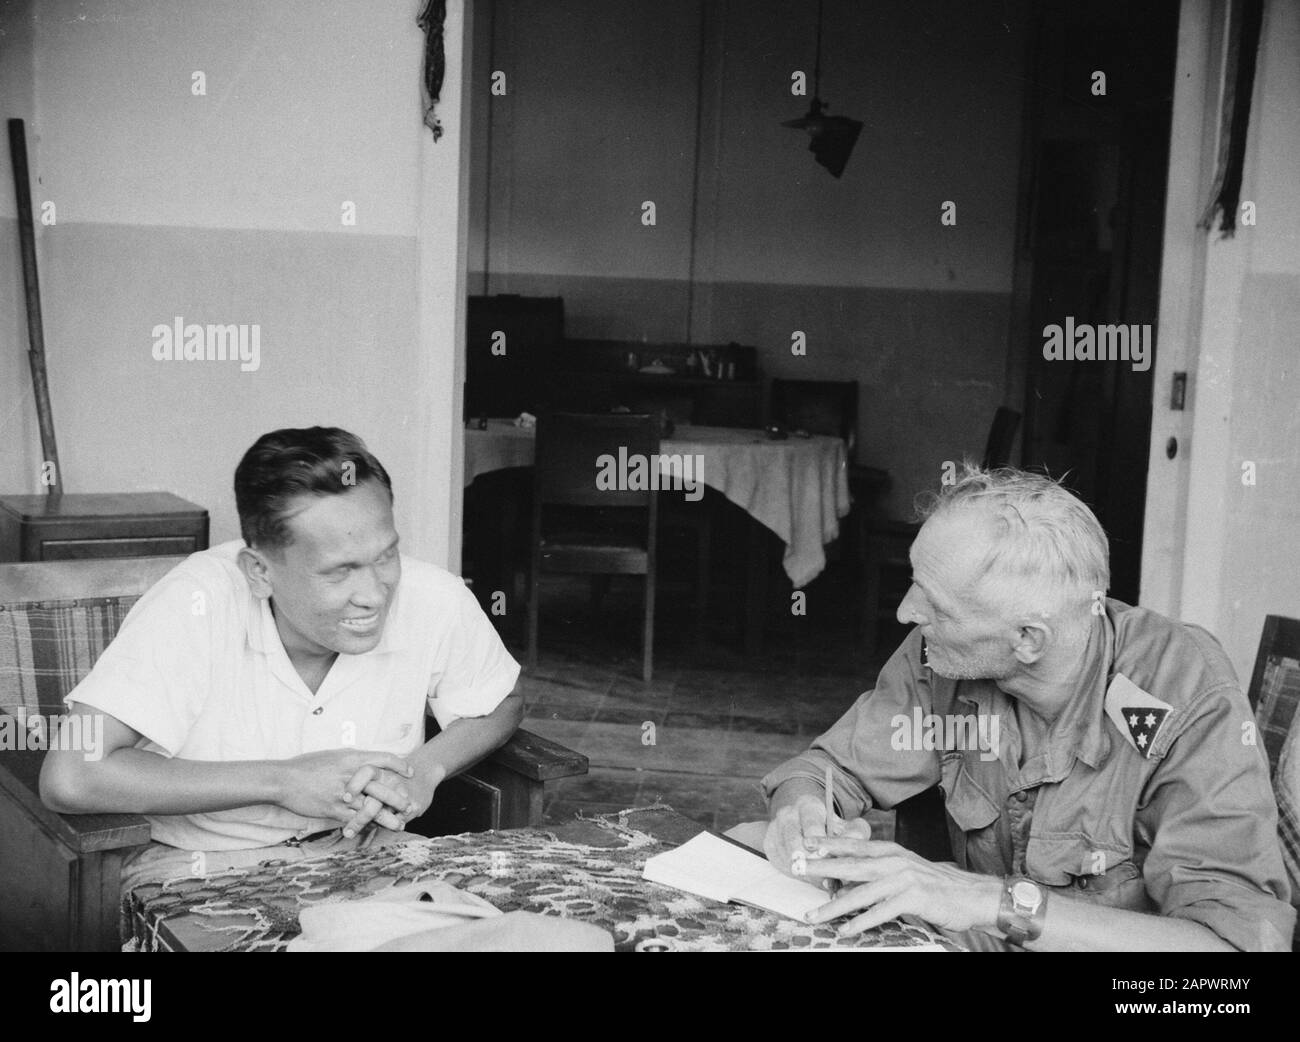 Advances from Fort de Kock to Pajancombo (in Baso)  [Dutch intelligence officer? in conversation or questioning with Indonesian man] Date: 23 December 1948 Location: Bukittinggi, Indonesia, Dutch East Indies, Sumatra Stock Photo